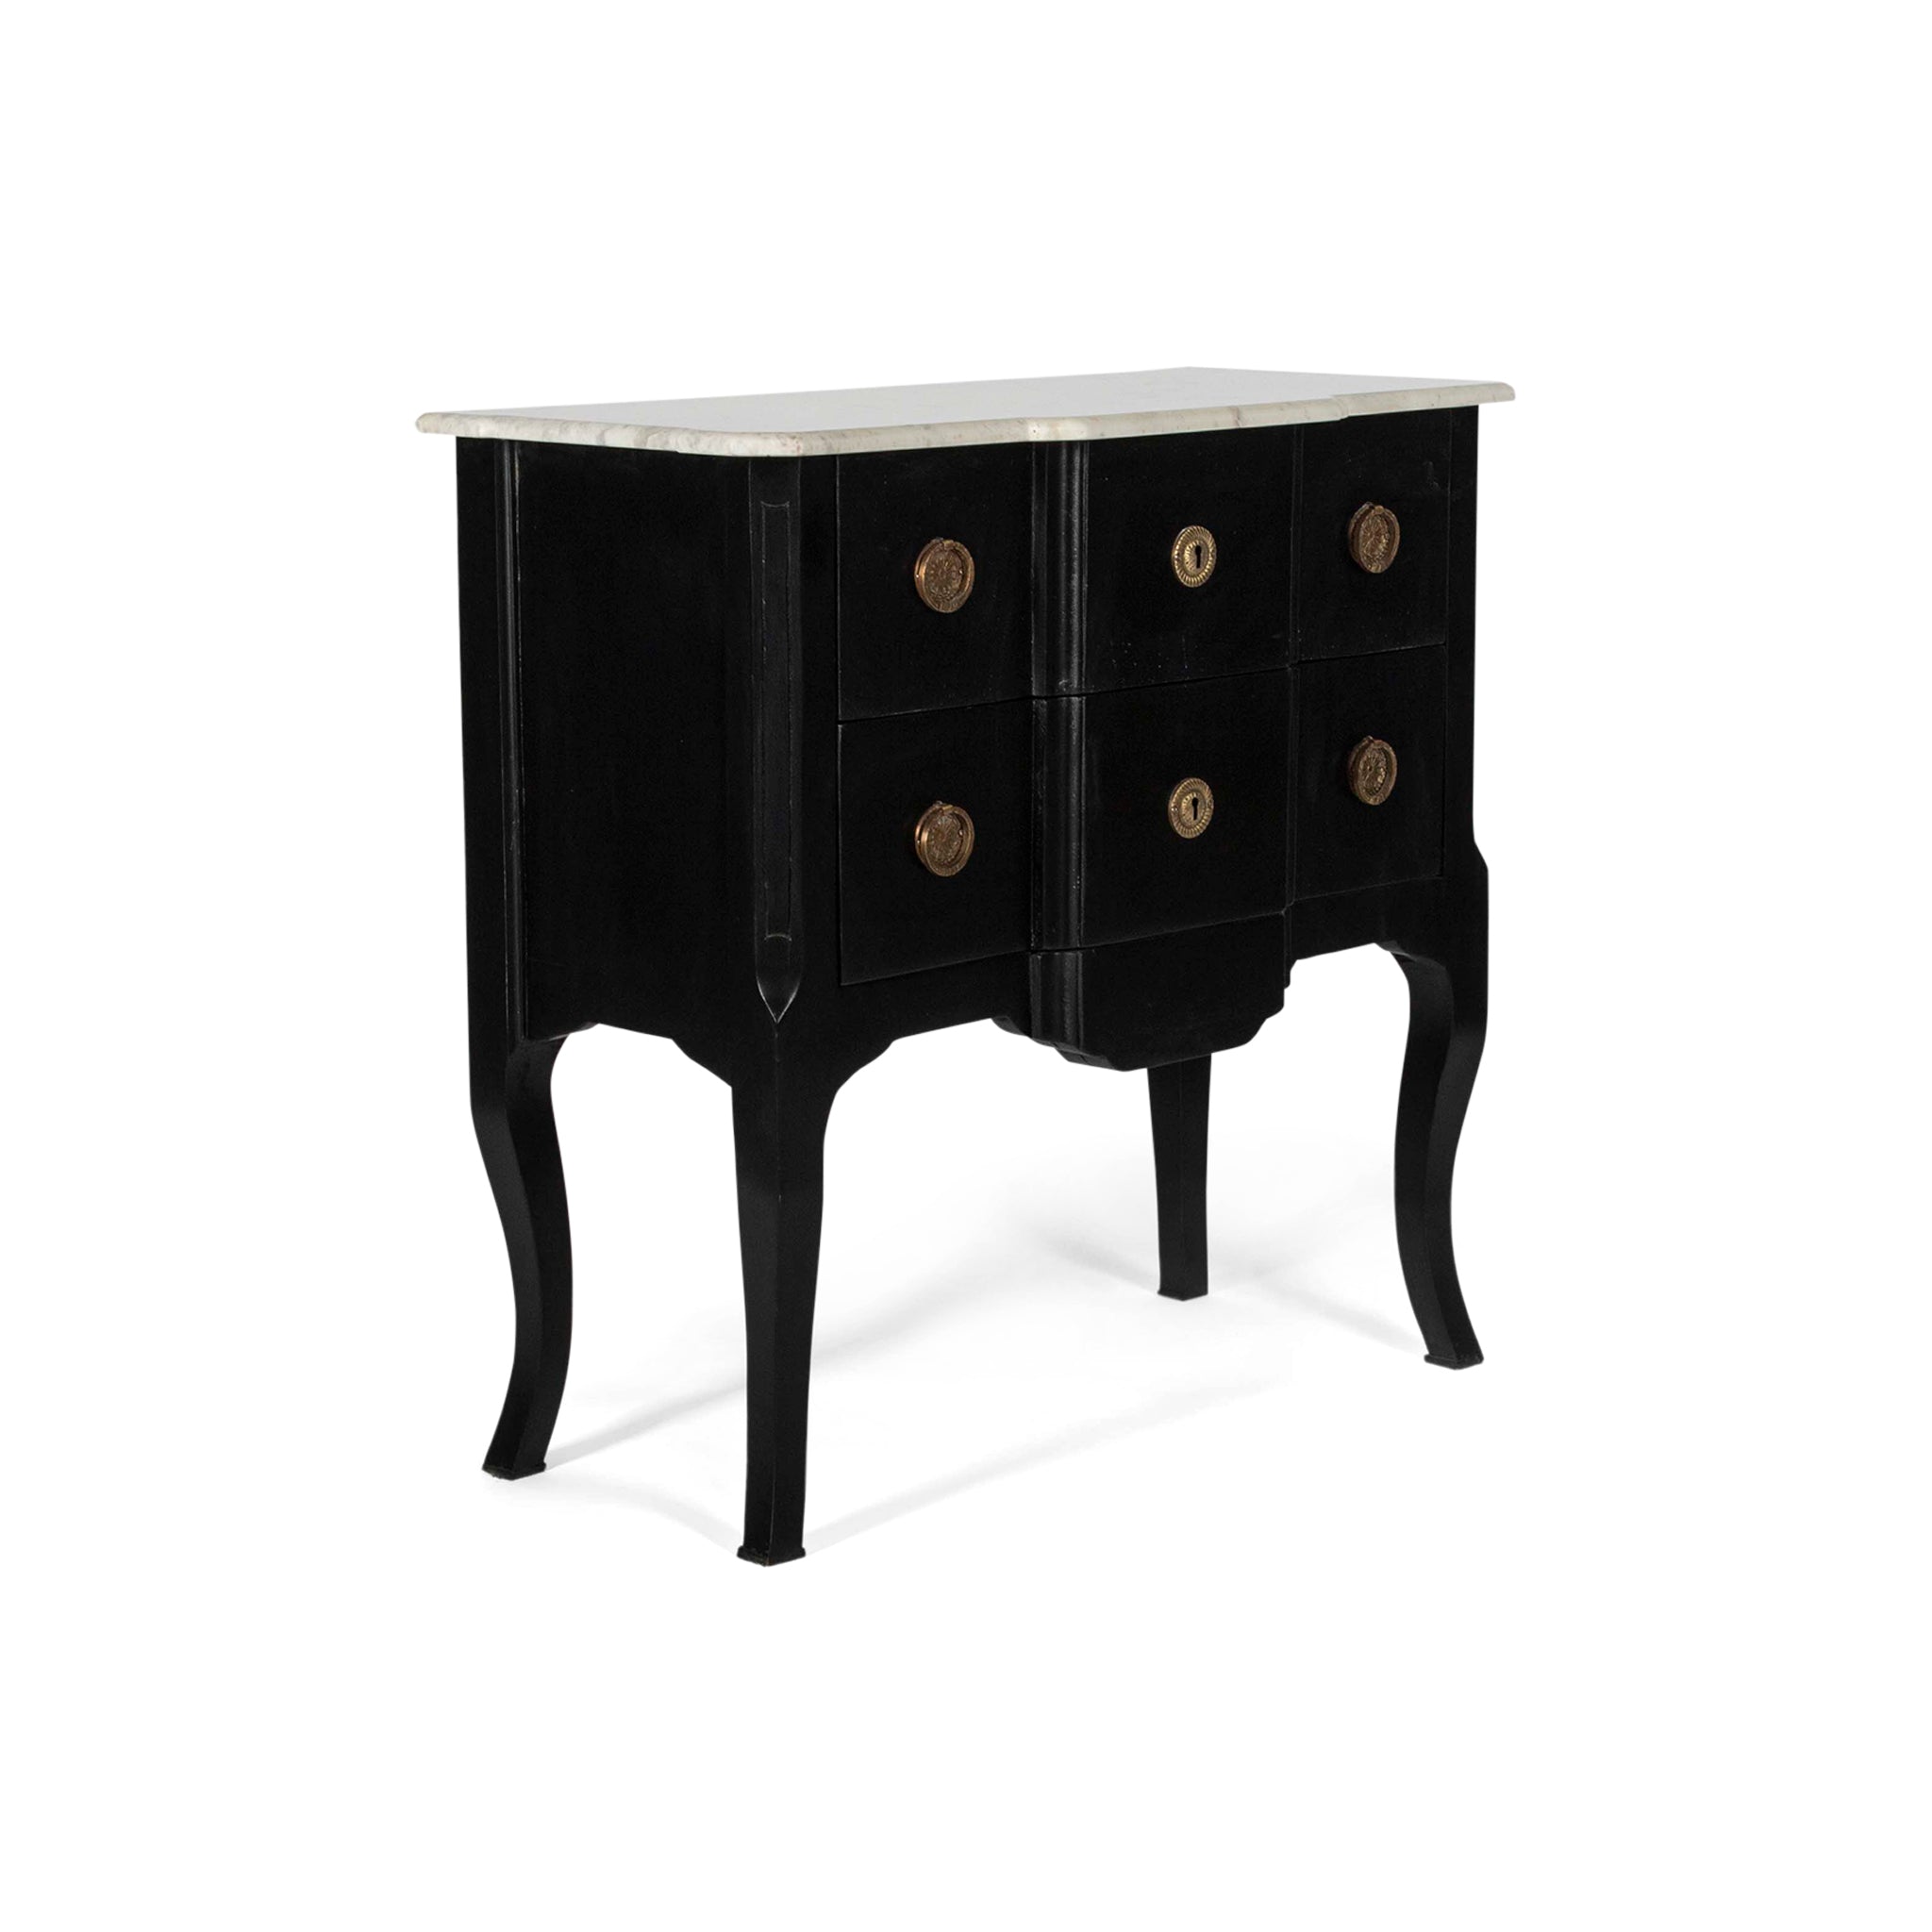 Isometric View of the Directoire Chest on a White Background